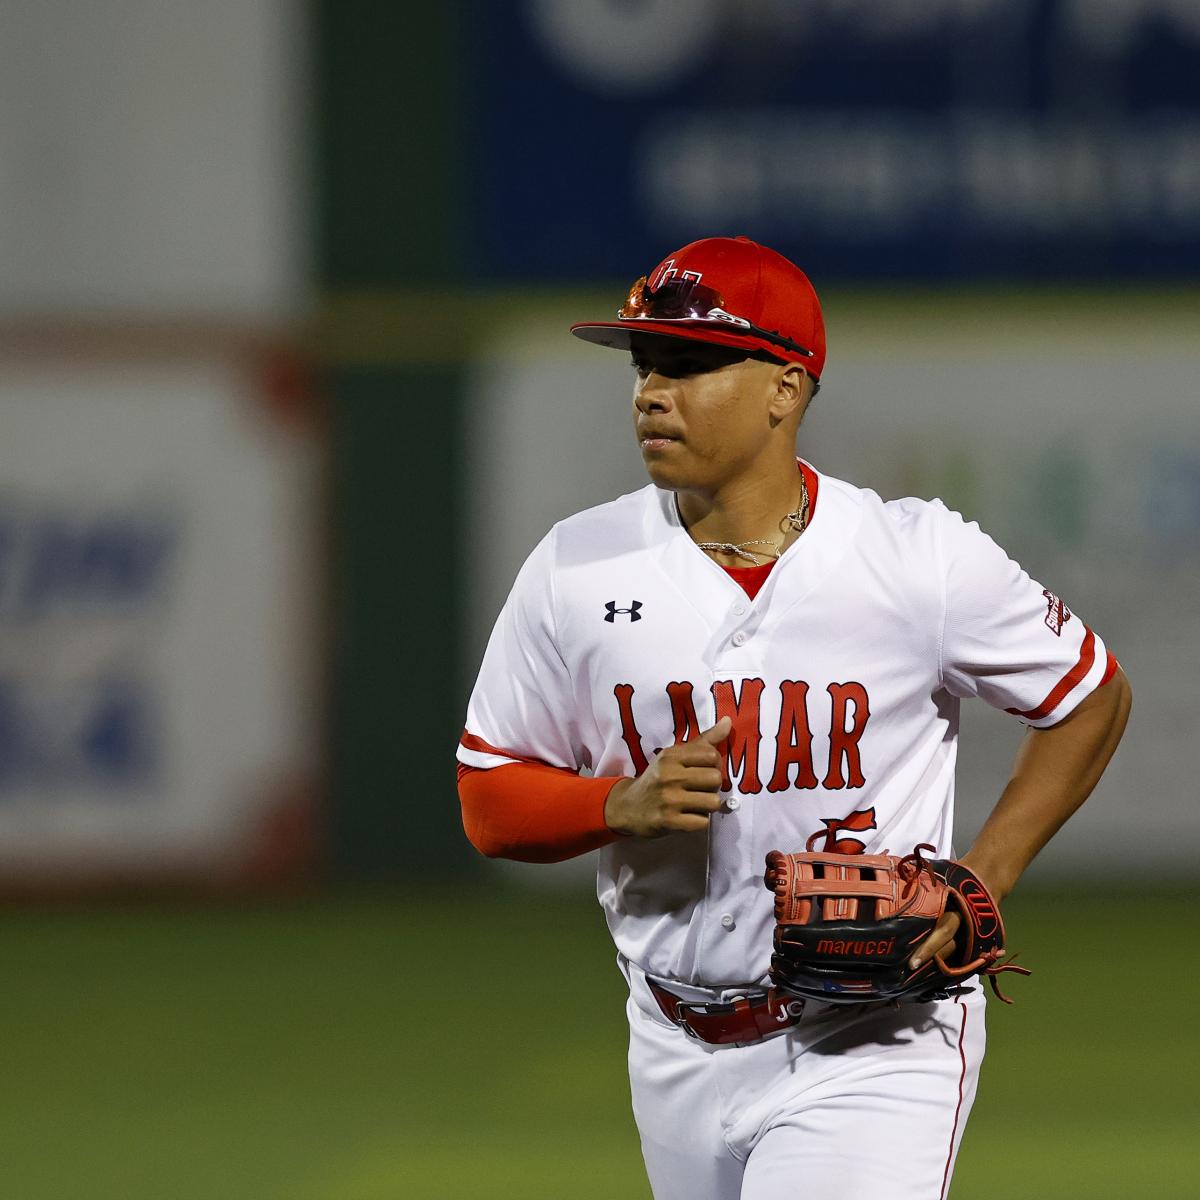 Astros sign J.C. Correa, brother of Carlos, as undrafted free